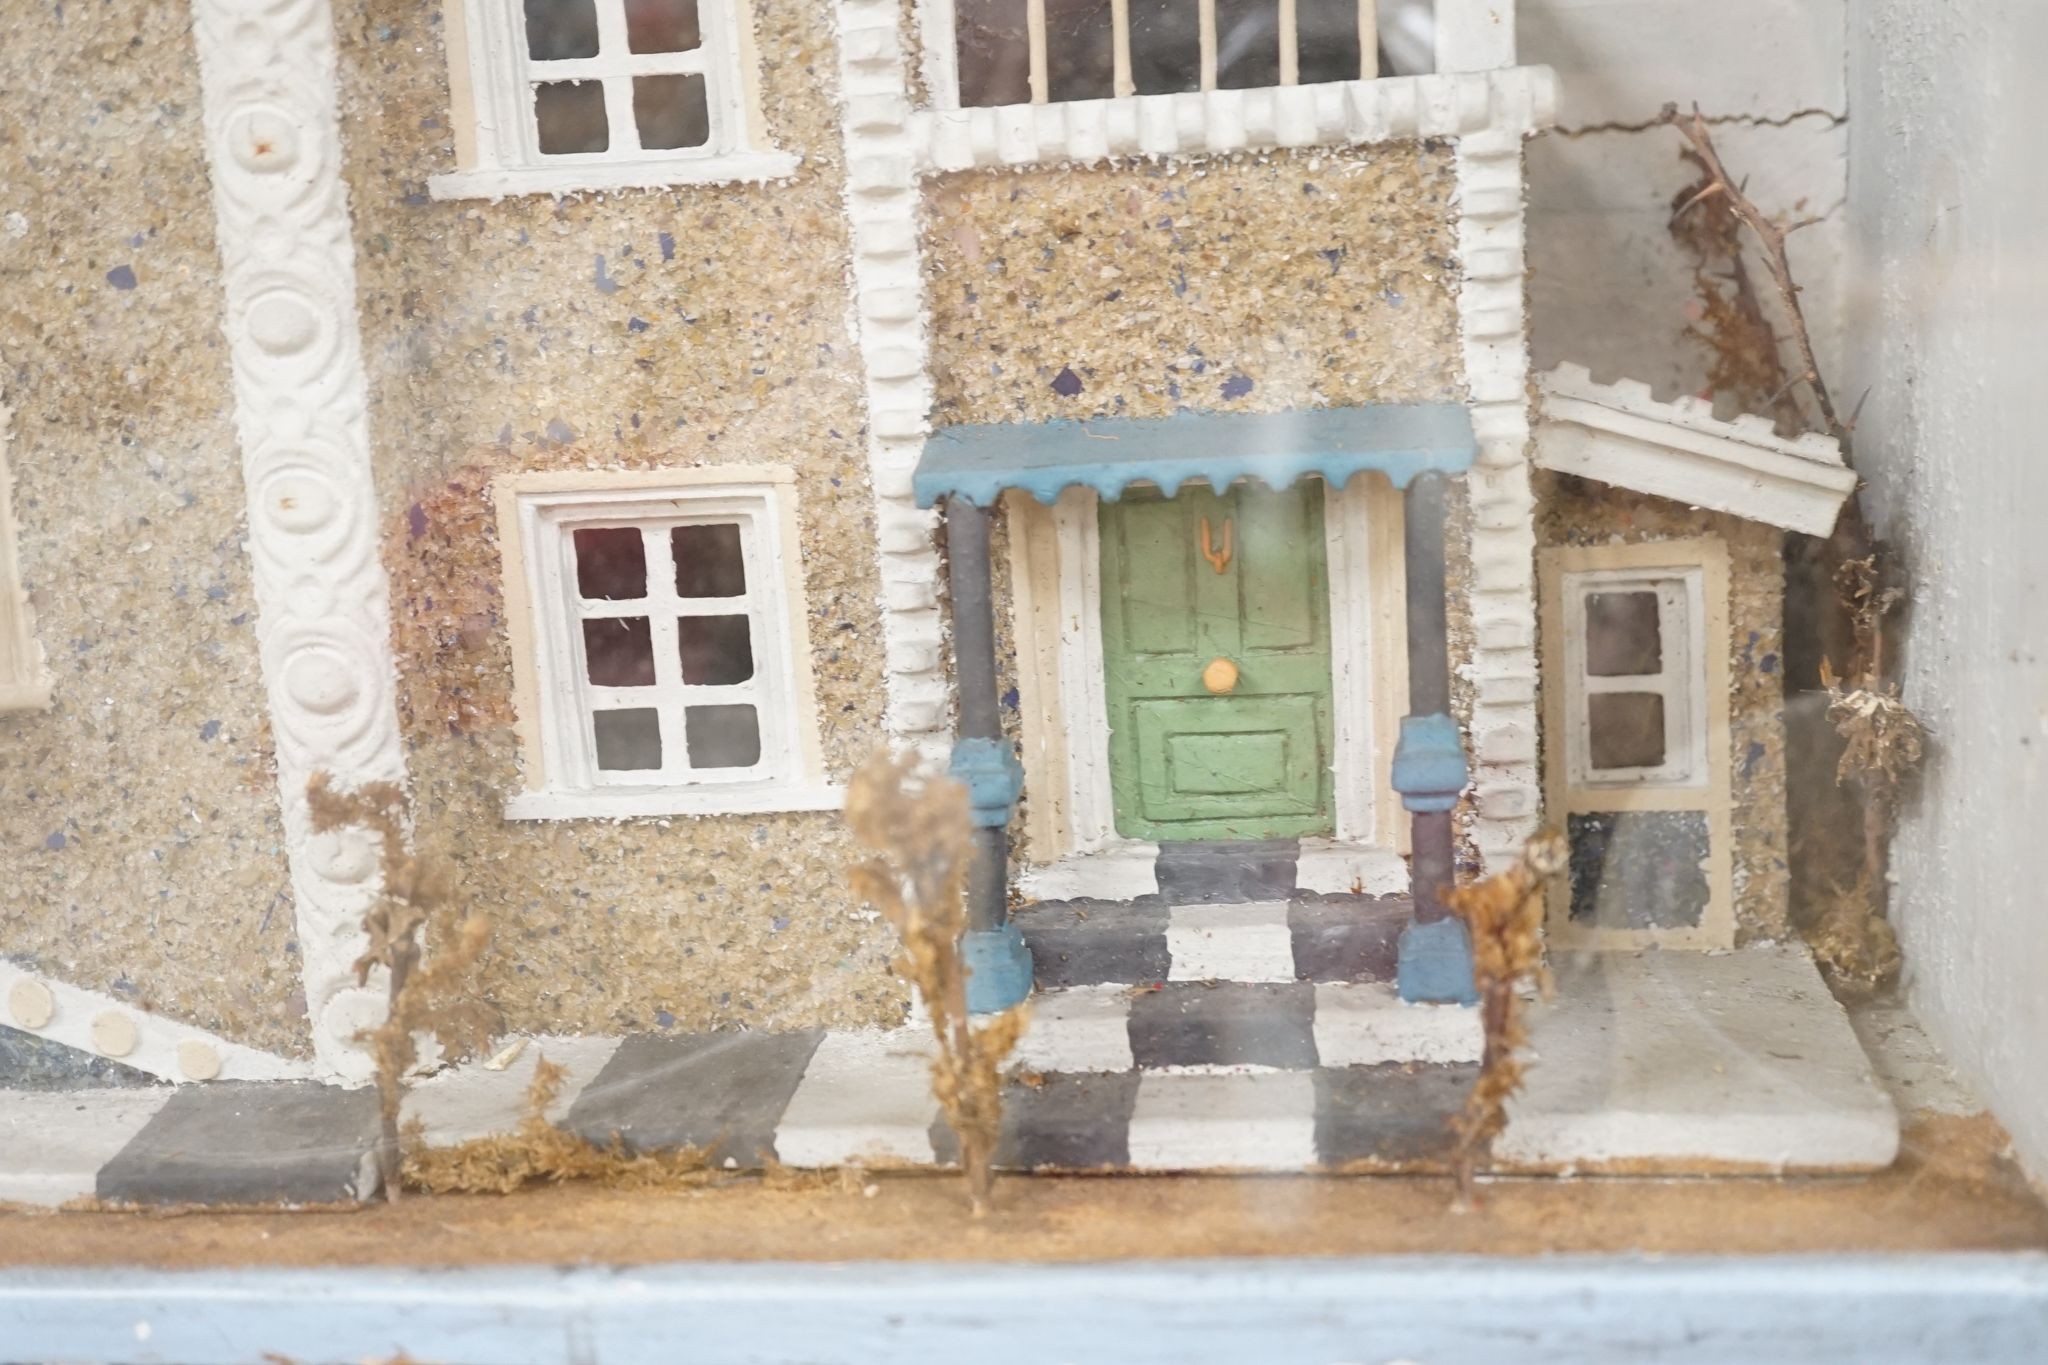 A diorama of a country house, case 63 cm wide